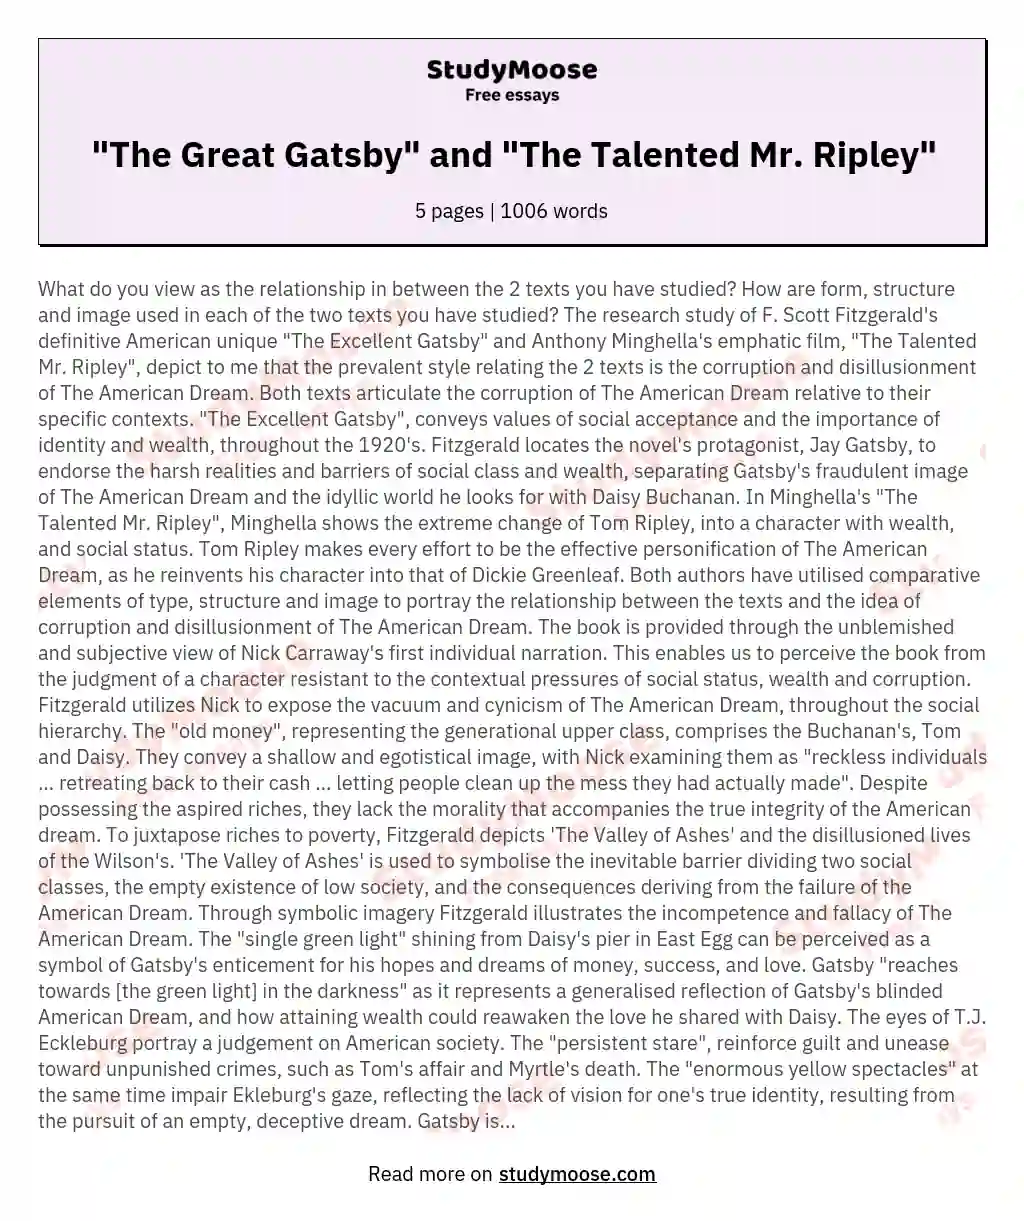 "The Great Gatsby" and "The Talented Mr. Ripley" essay